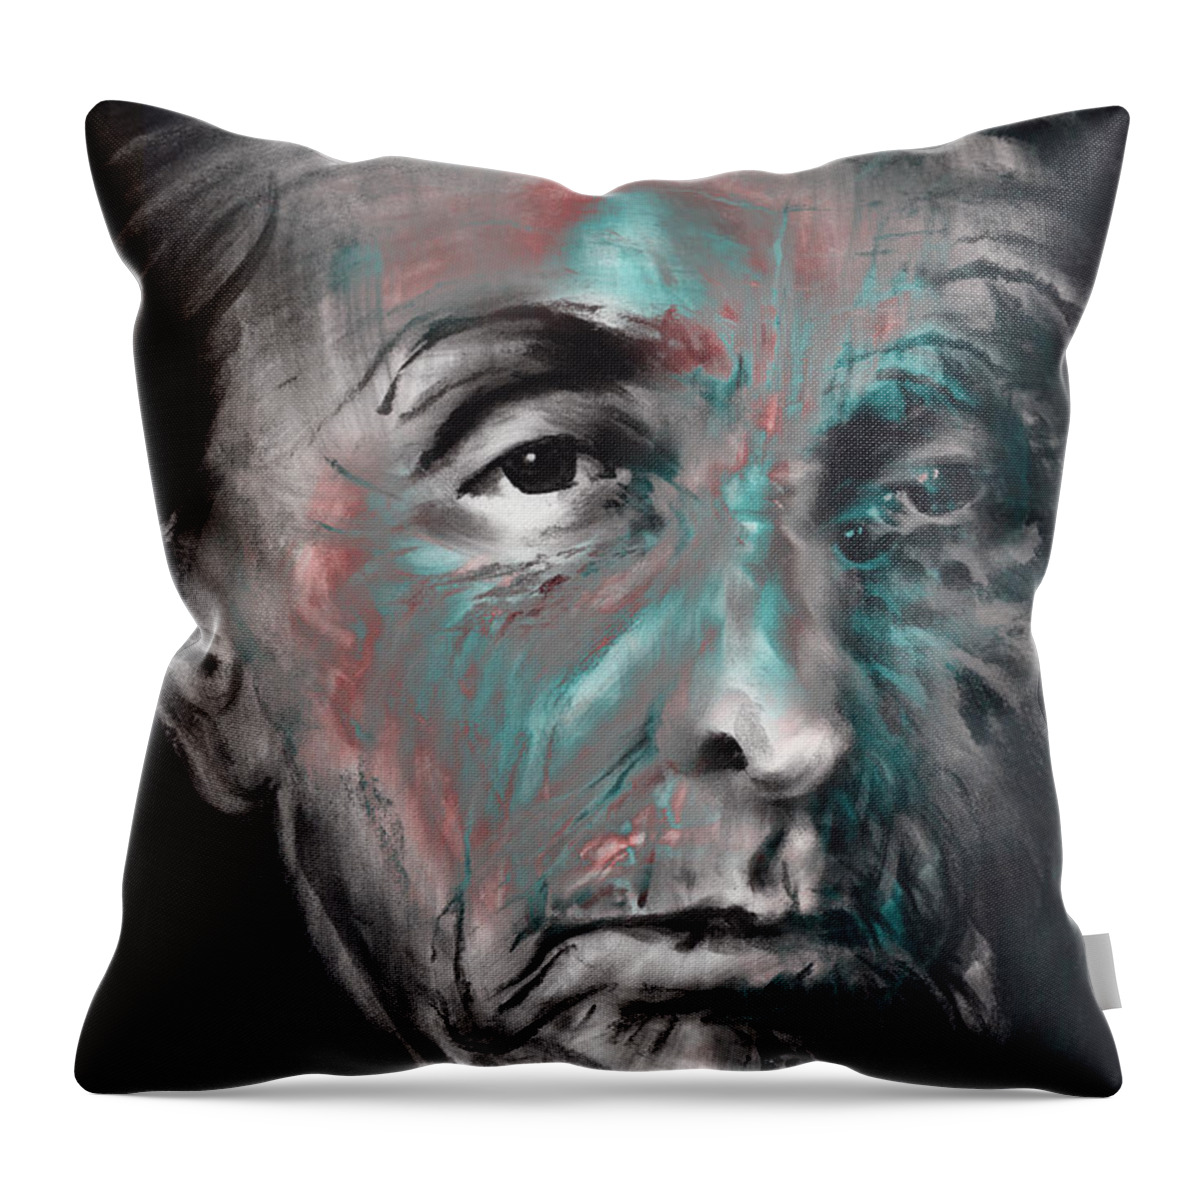 Figurative Throw Pillow featuring the drawing Georgia-o'keeffe by Paul Davenport